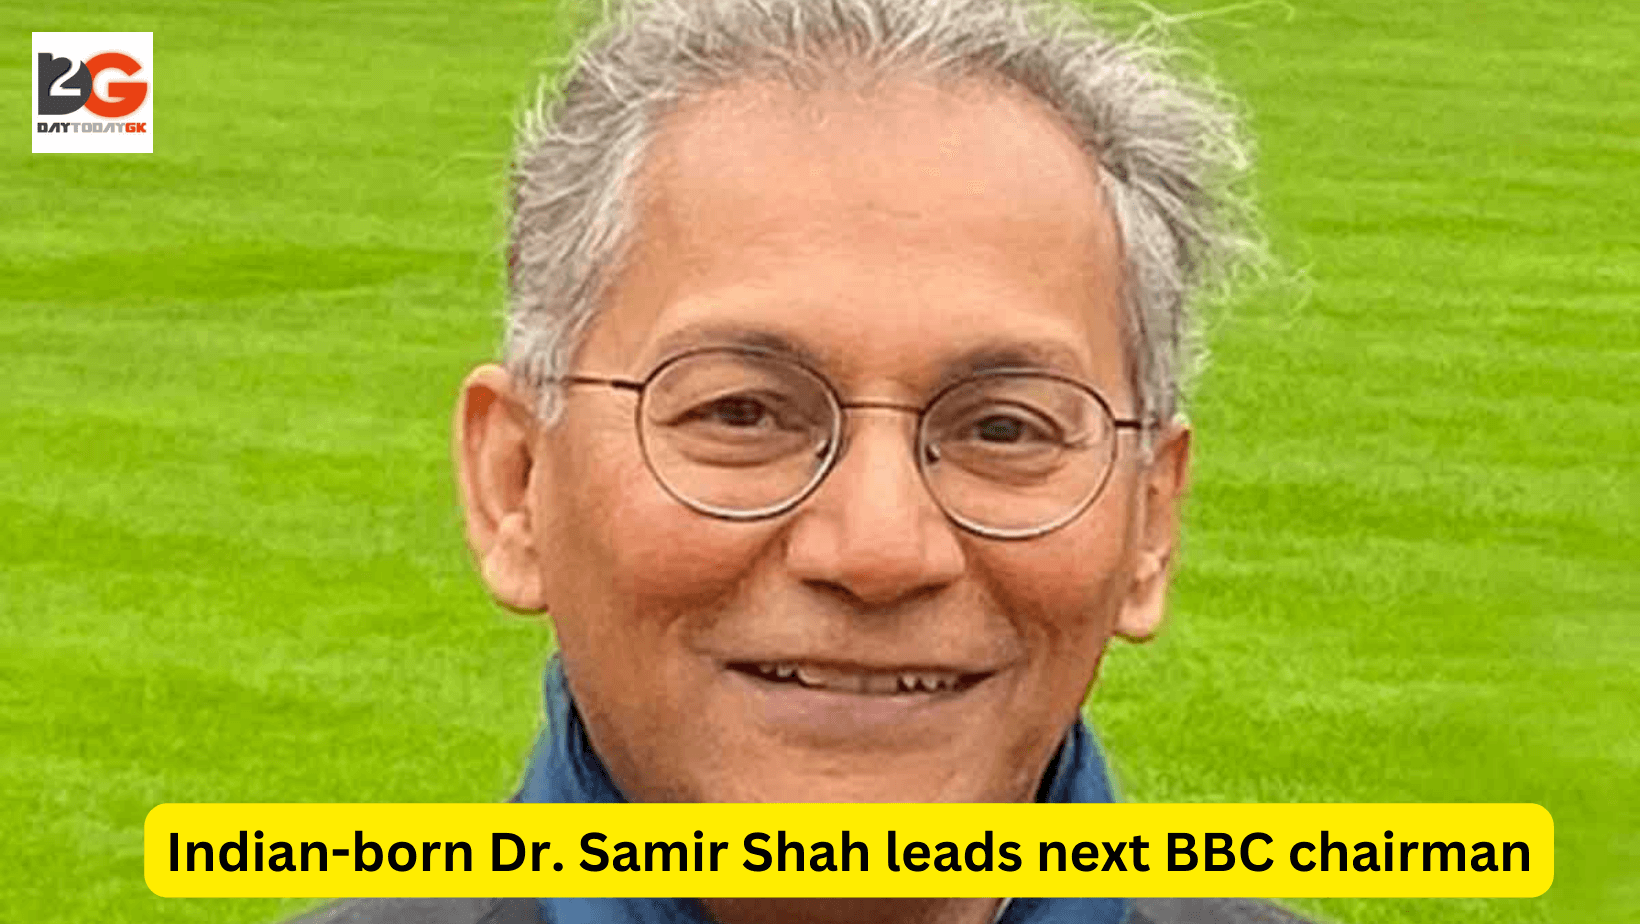 Indian media executive Dr. Samir Shah reveals UK government’s proposed BBC chairman